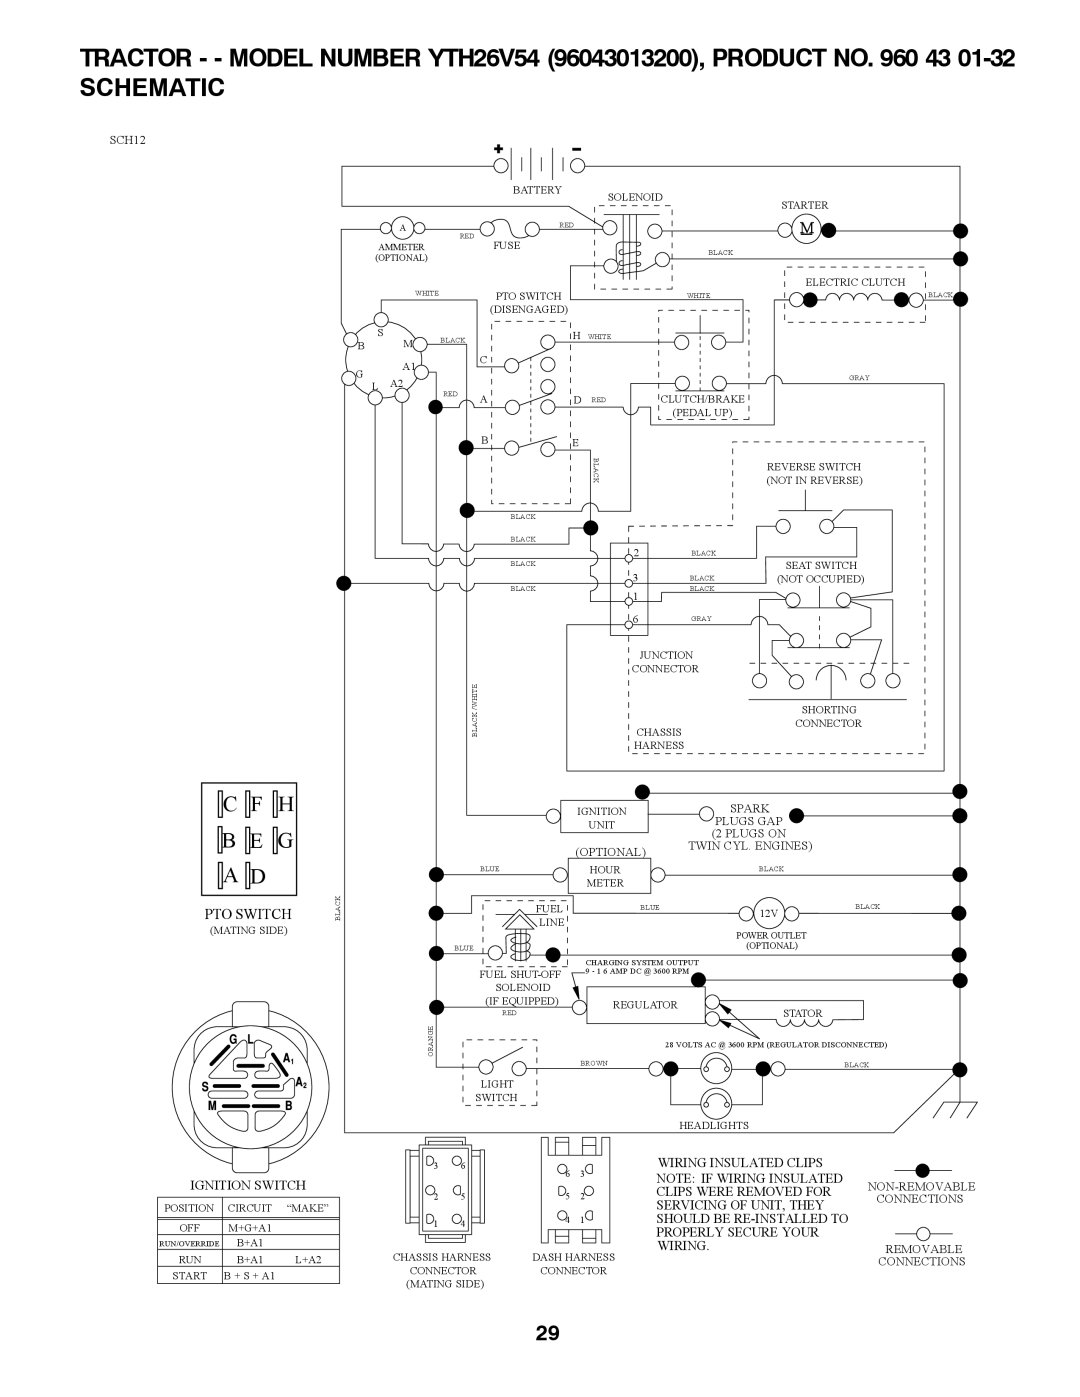 Husqvarna Schematic, TRACTOR - - MODEL NUMBER YTH26V54 96043013200, PRODUCT NO, C F H B E G A D, Pto Switch, SCH12 